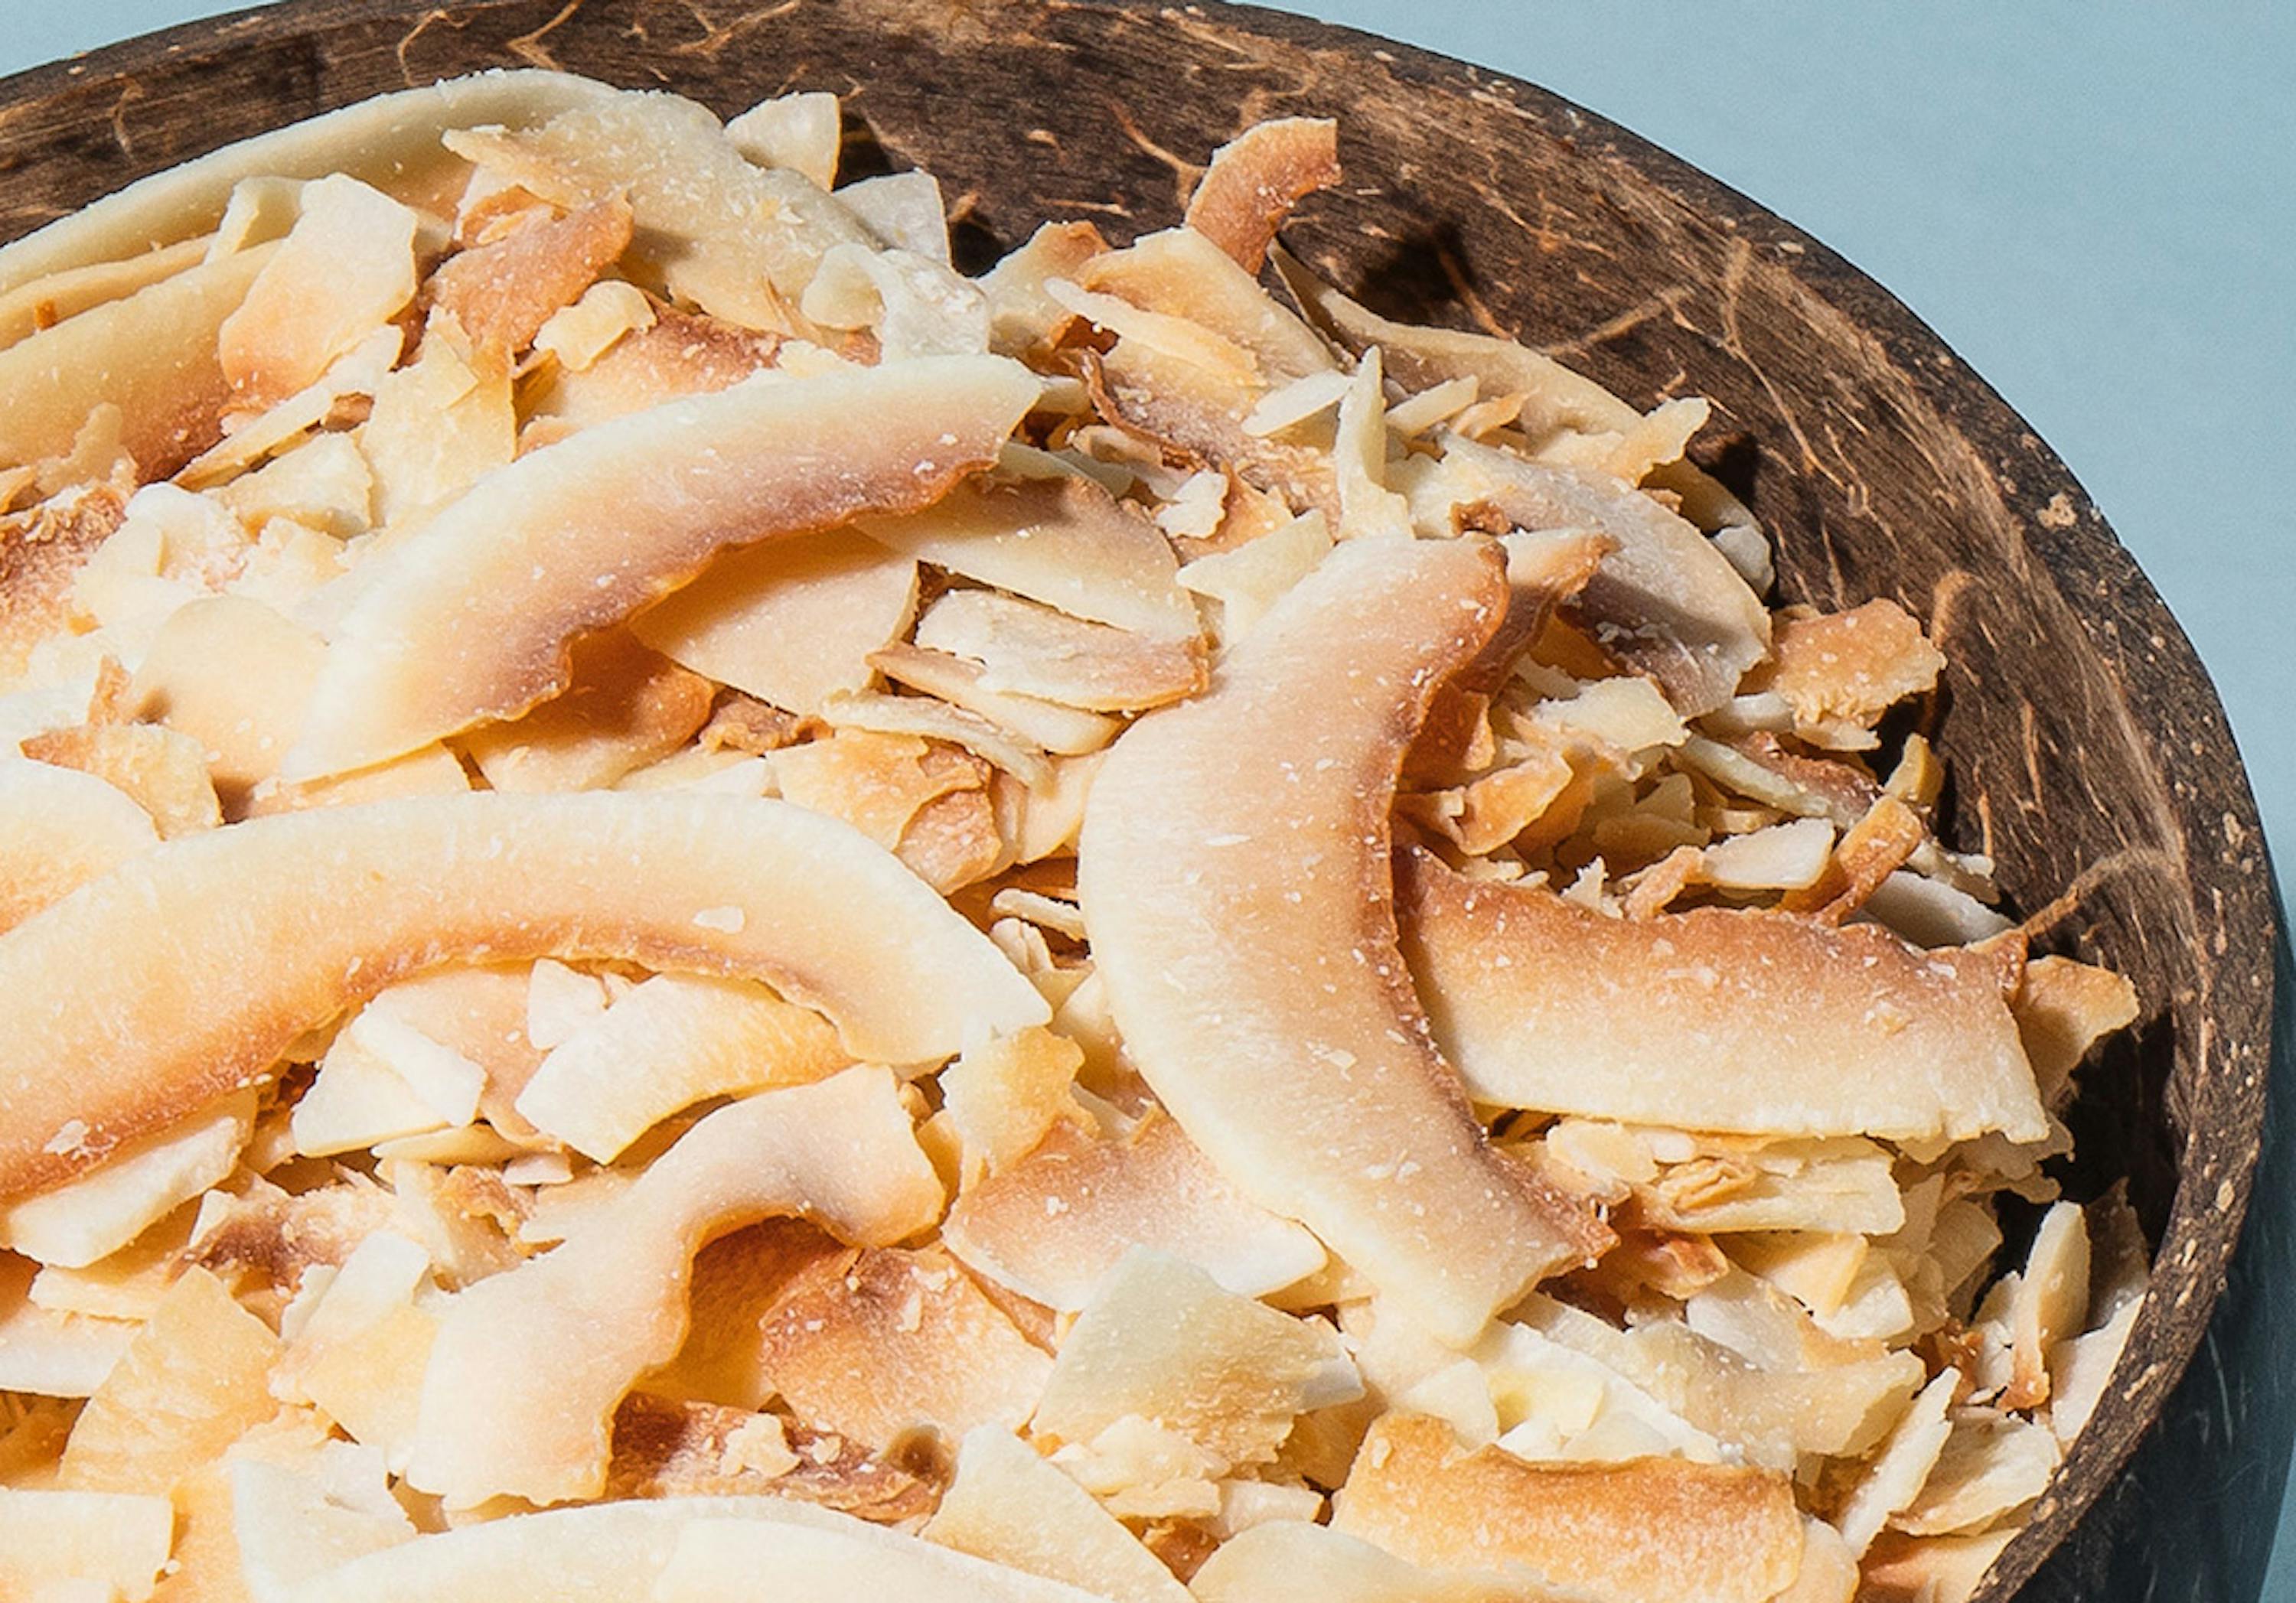 All about coconuts: From the palm tree to your snack pantry